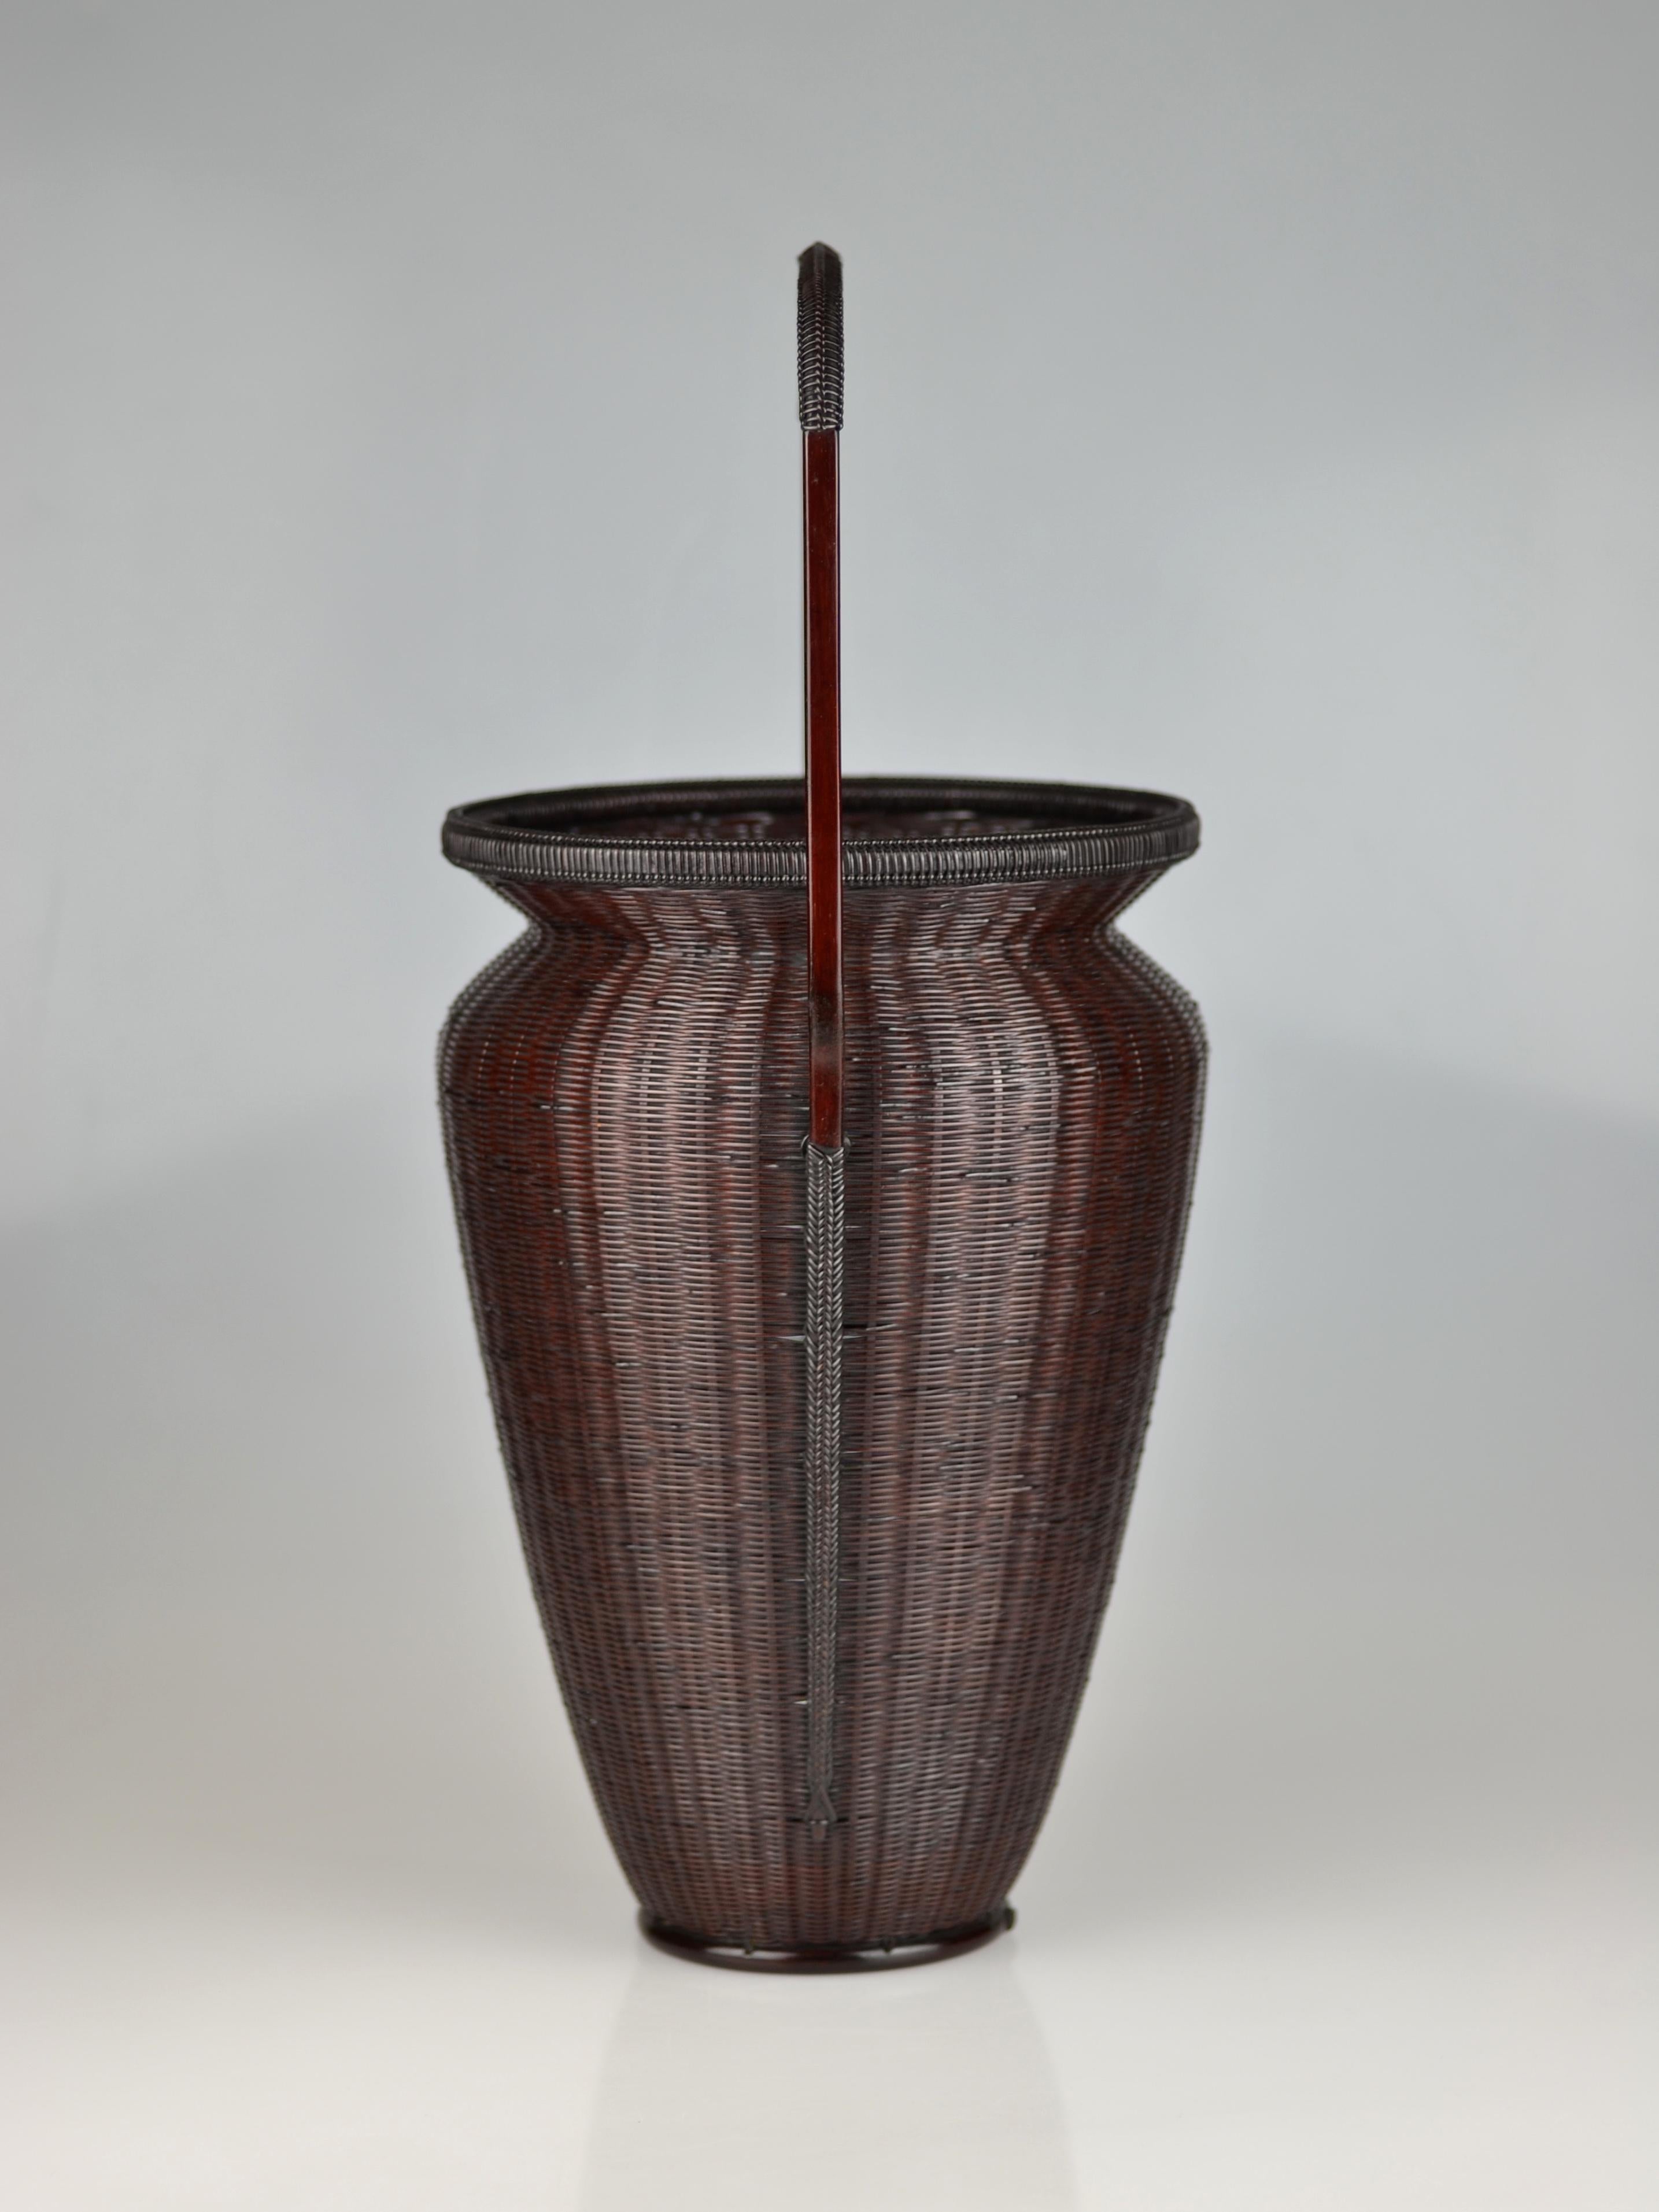 Traditional Japanese Bamboo Flower Basket by Tanabe Chikuunsai II In Good Condition For Sale In Berlin, Berlin